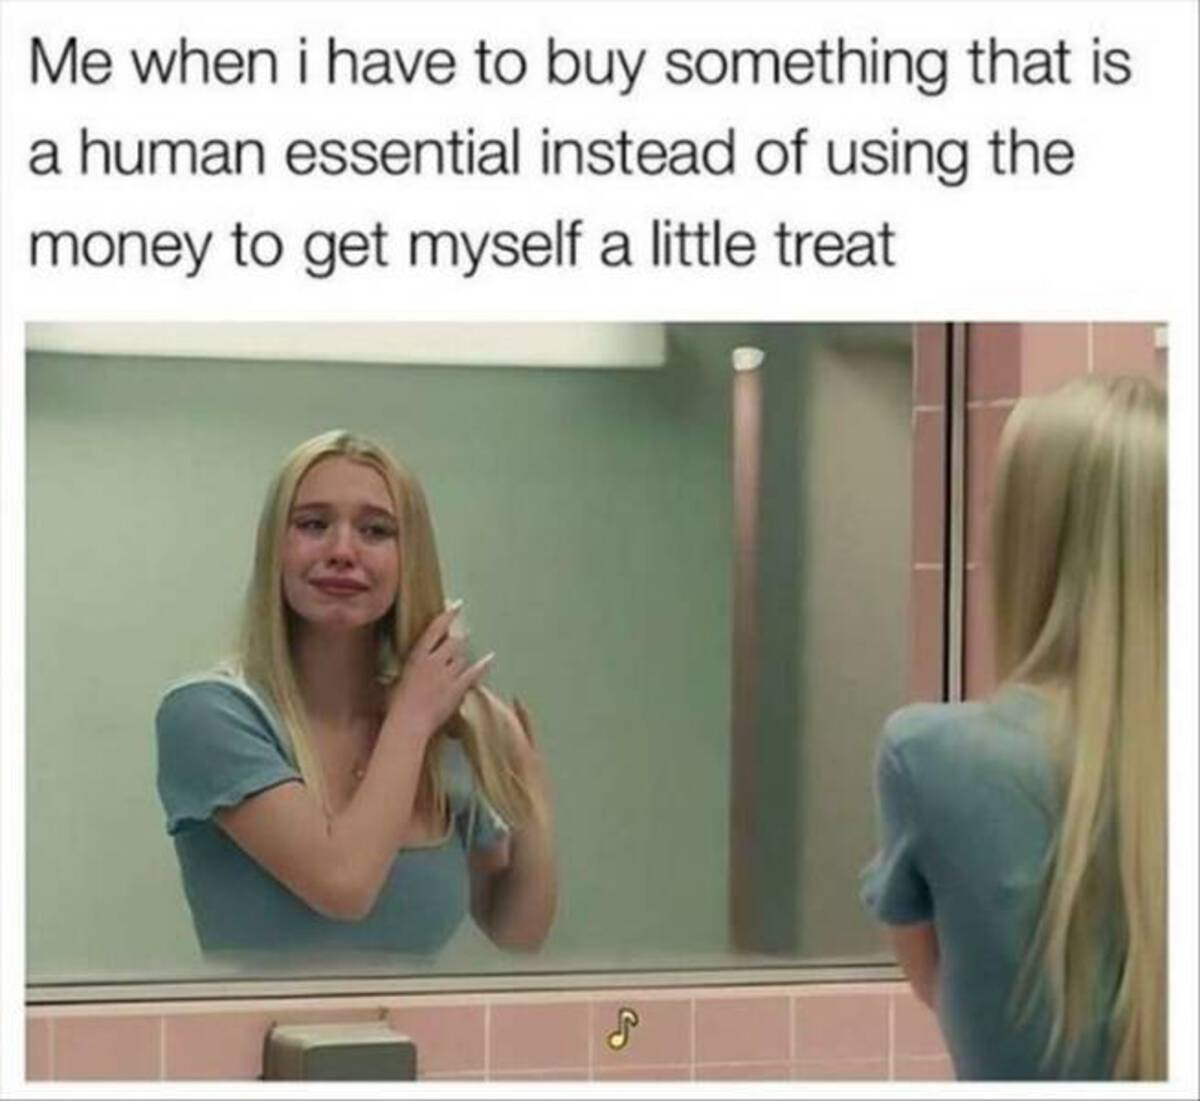 you tell him to leave you alone - Me when i have to buy something that is a human essential instead of using the money to get myself a little treat